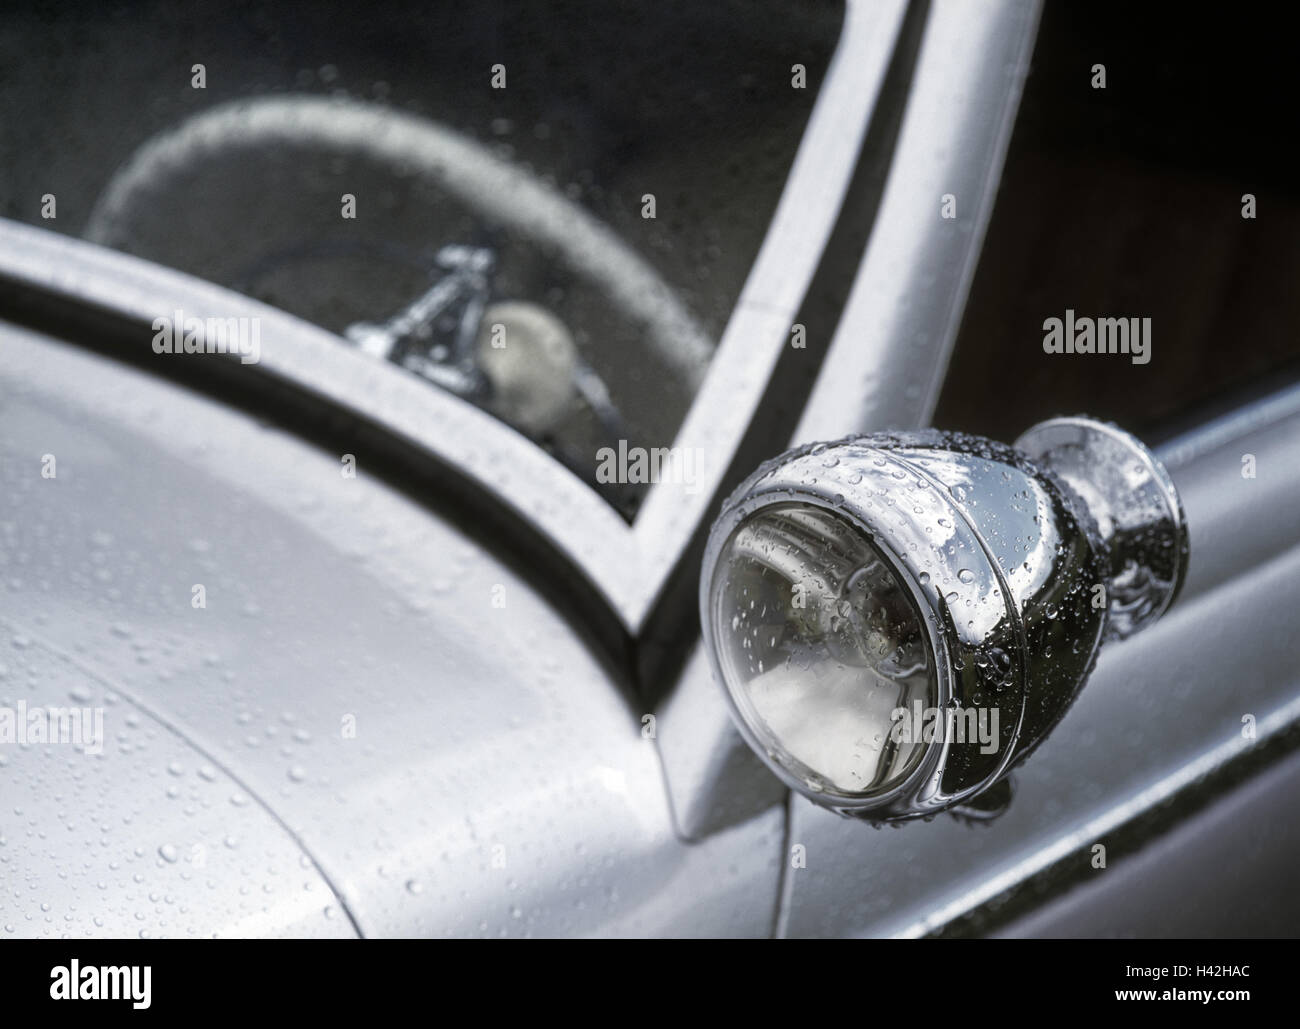 Car, old-timer, detail, headlight, windscreen, wet, vehicle, passenger car, silver, flatly, brilliantly, polishes, cultivated, nobly, old, window, window pane, car window, steering wheel, windscreen, insight, notch, brightness, rain, drop of water, raindrop, rain weather, moisture, nostalgically, in an old-fashioned way, luxury, nostalgia, collector's object, collector's item, traffic, transport, economy, automobile industry, Mercedes Stock Photo